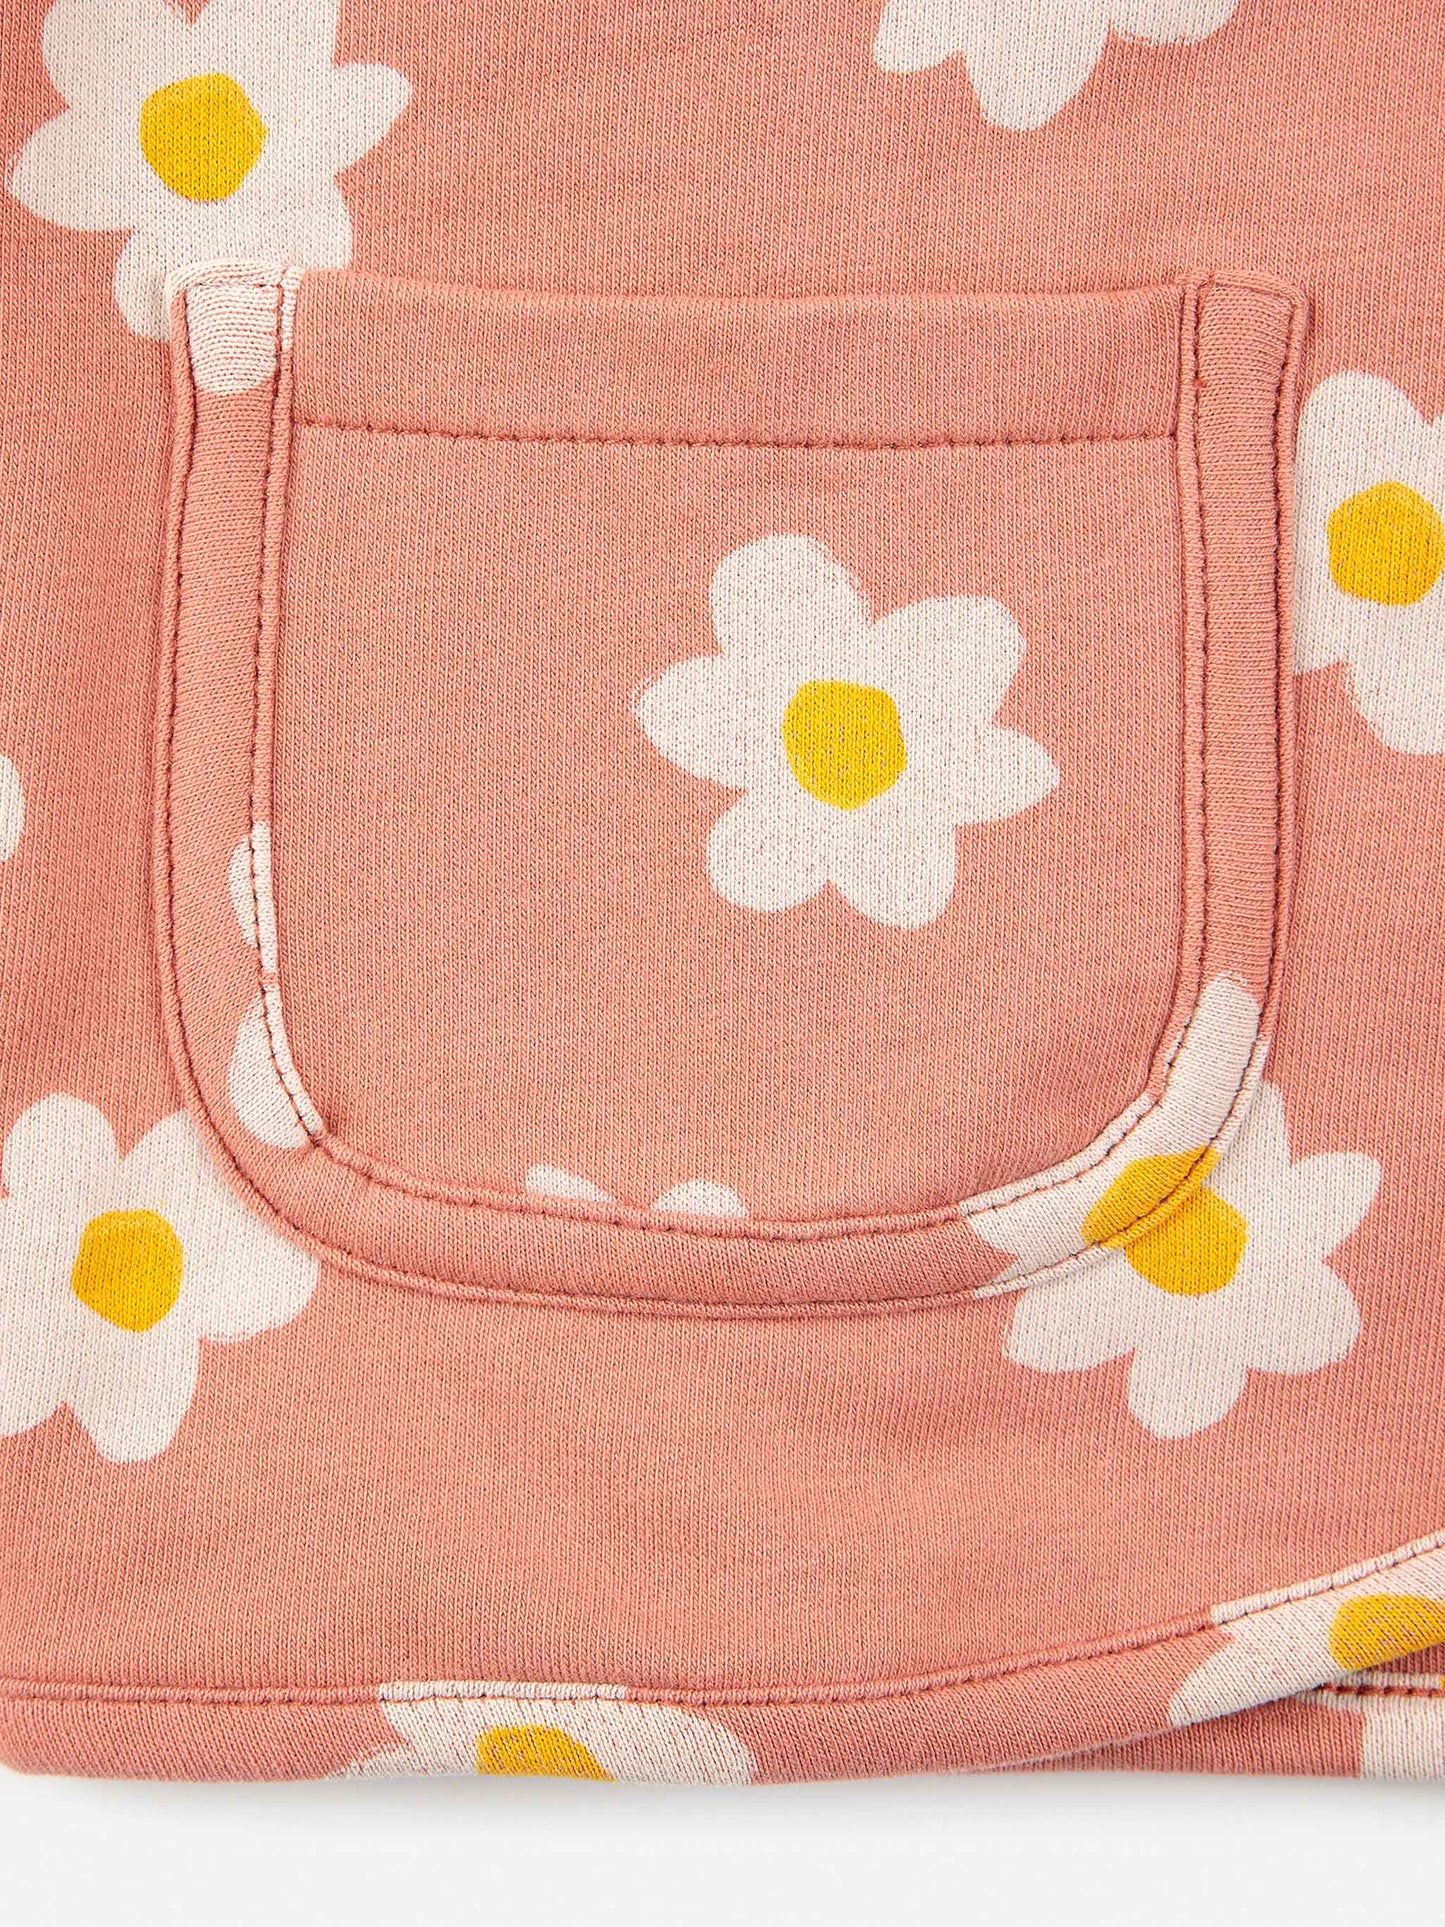 Bobo Choses Baby Little Flower Buttoned Sweatshirt - 95% organic cotton 5% elastane salmon pink sweatshirt. Designed with long sleeves, dropped shoulder, front snap fastening, lining and patch pocket. It has a loose fit. Made in Portugal.